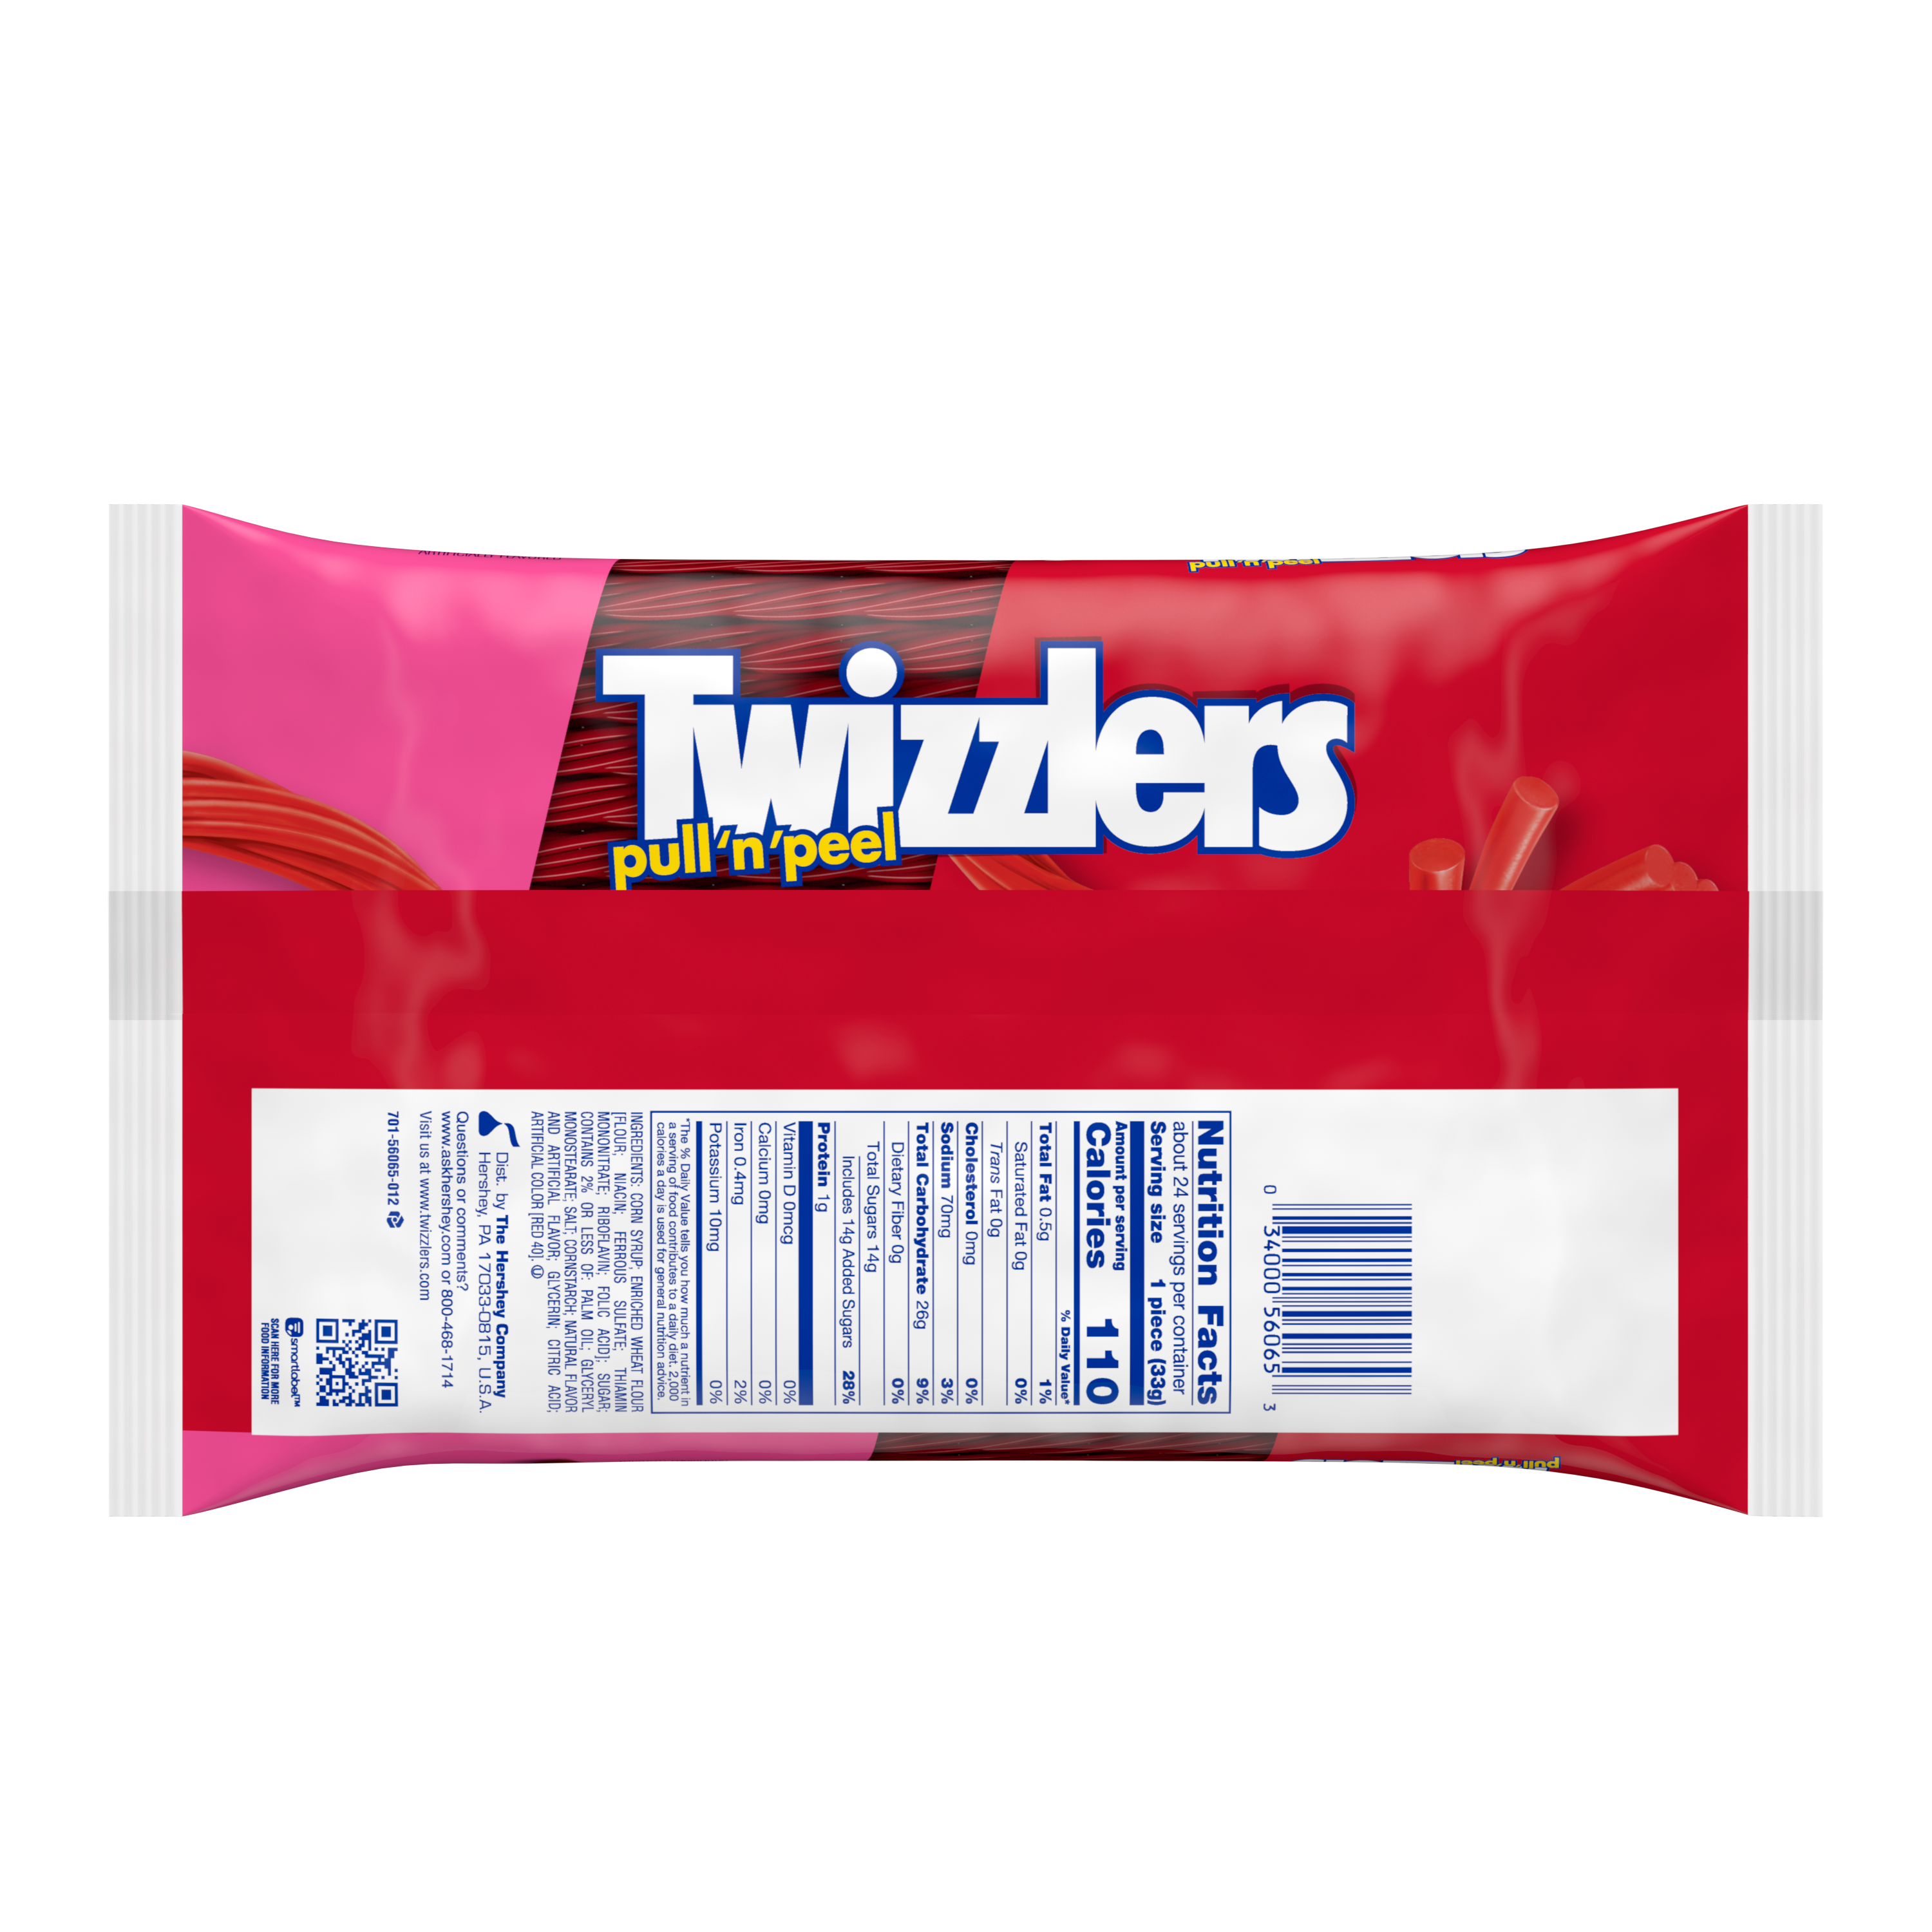 TWIZZLERS PULL 'N' PEEL Cherry Flavored Candy, 28 oz bag - Back of Package